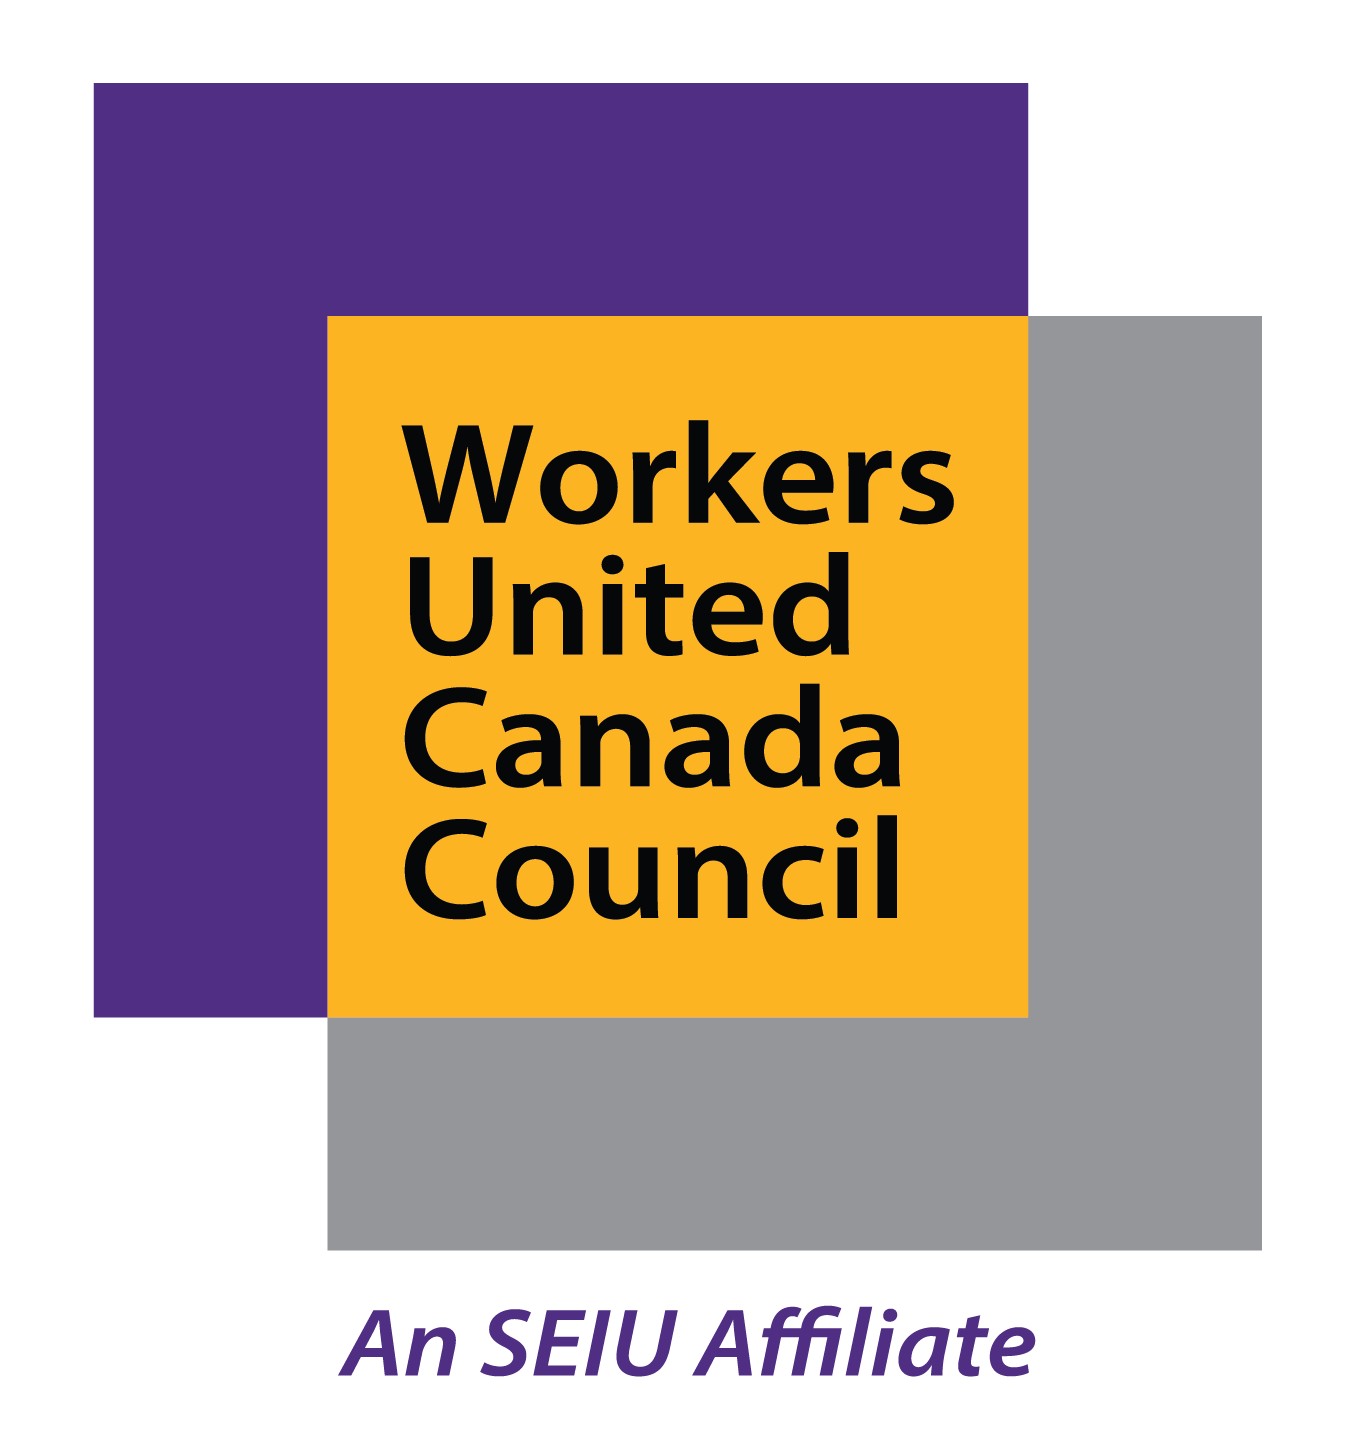 WORKERS UNITED CANADA COUNCIL